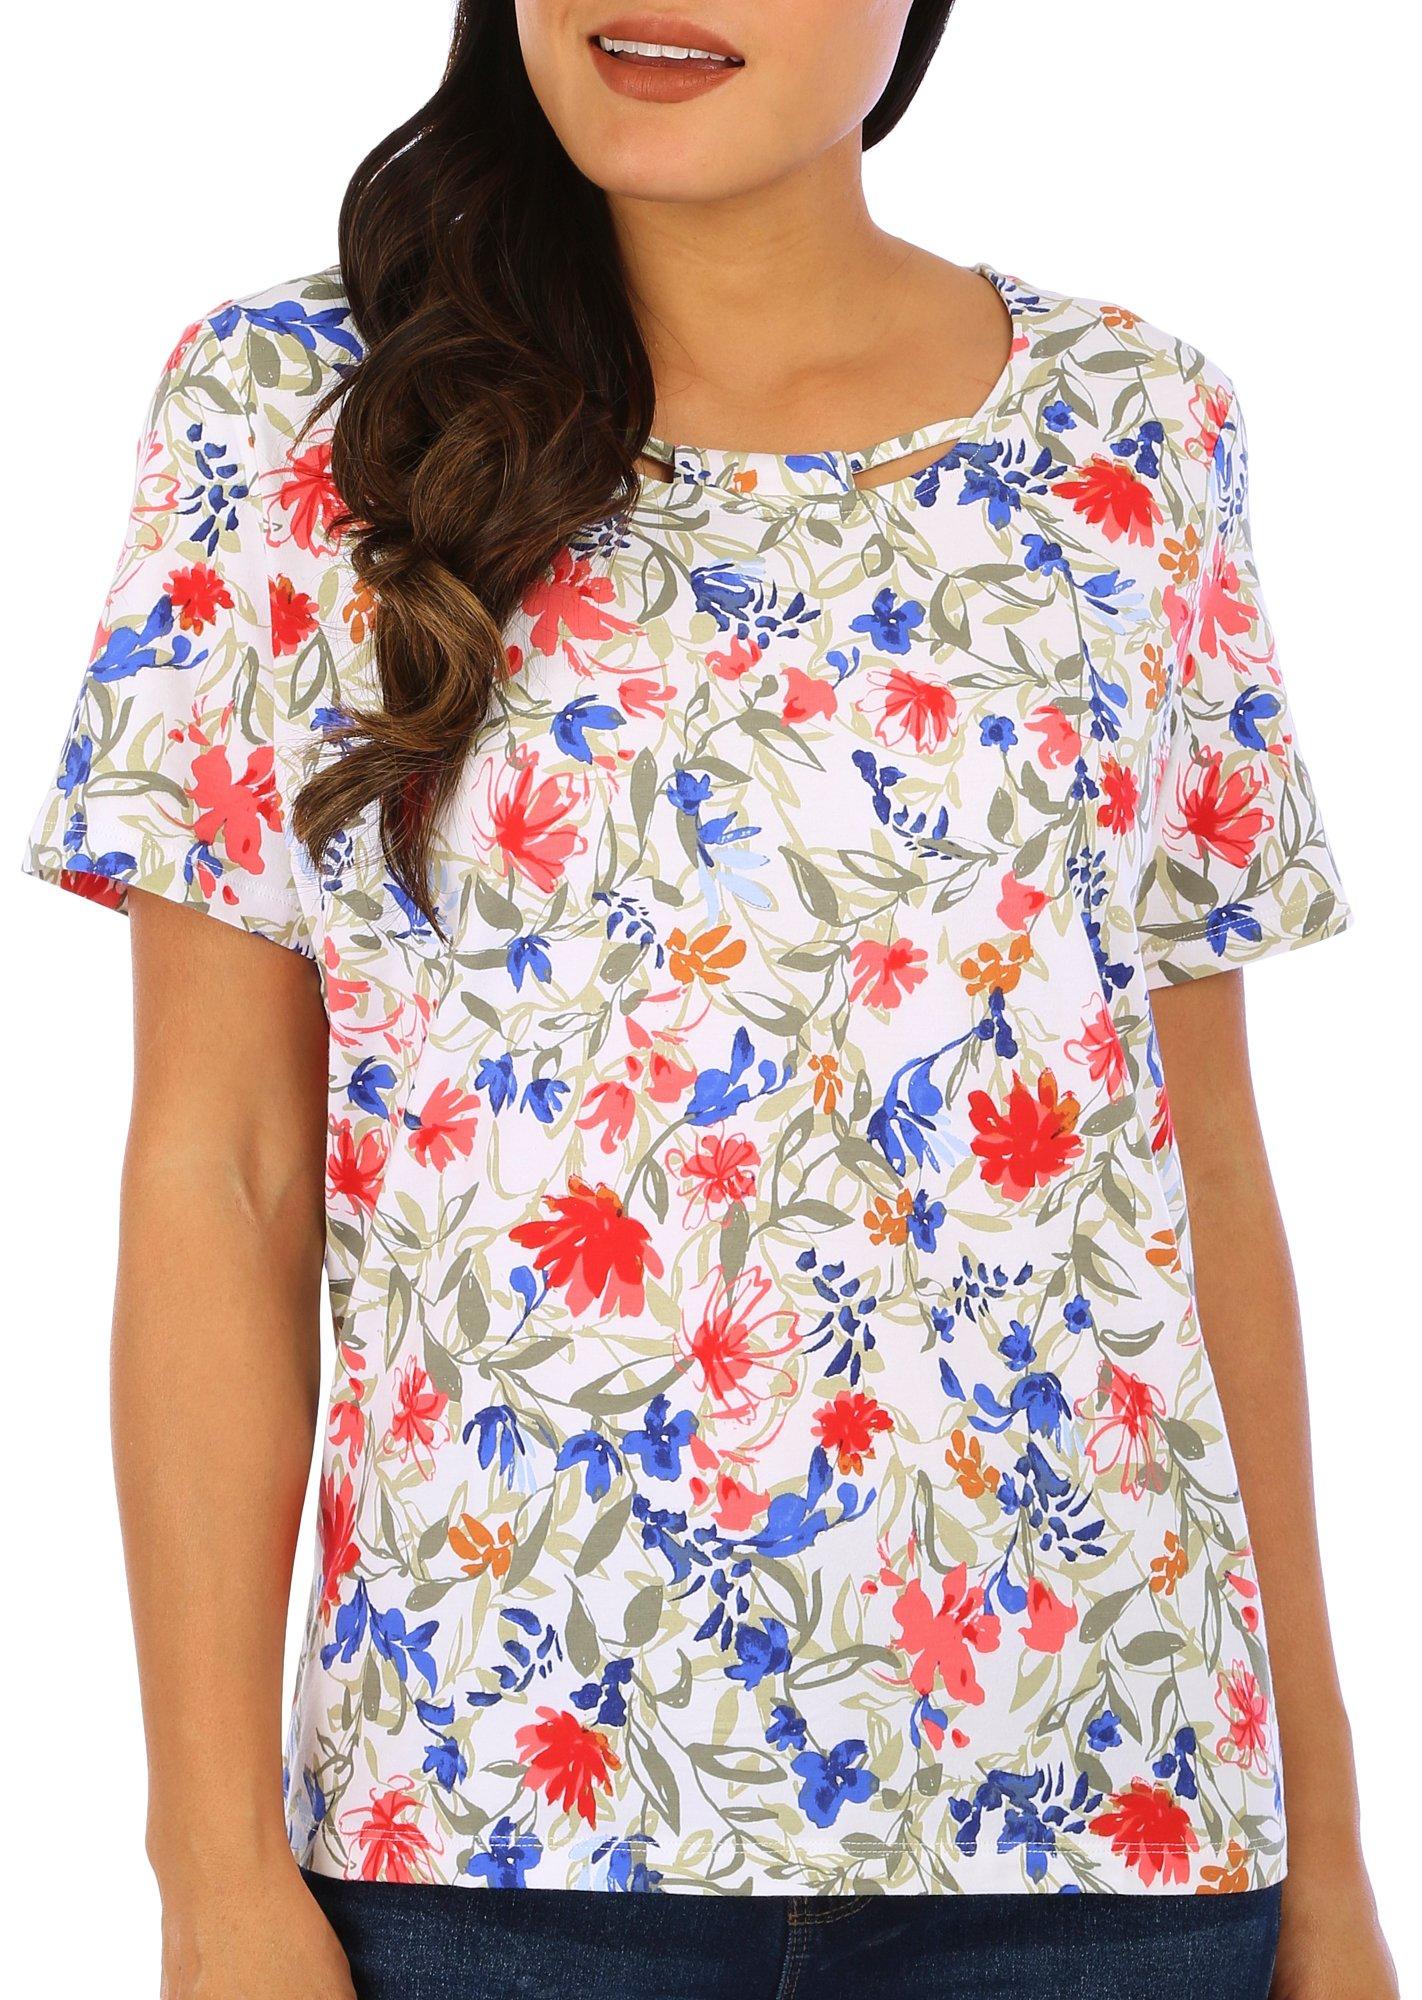 Coral Bay Petite Floral Double Keyhole Loop Short Sleeve Top